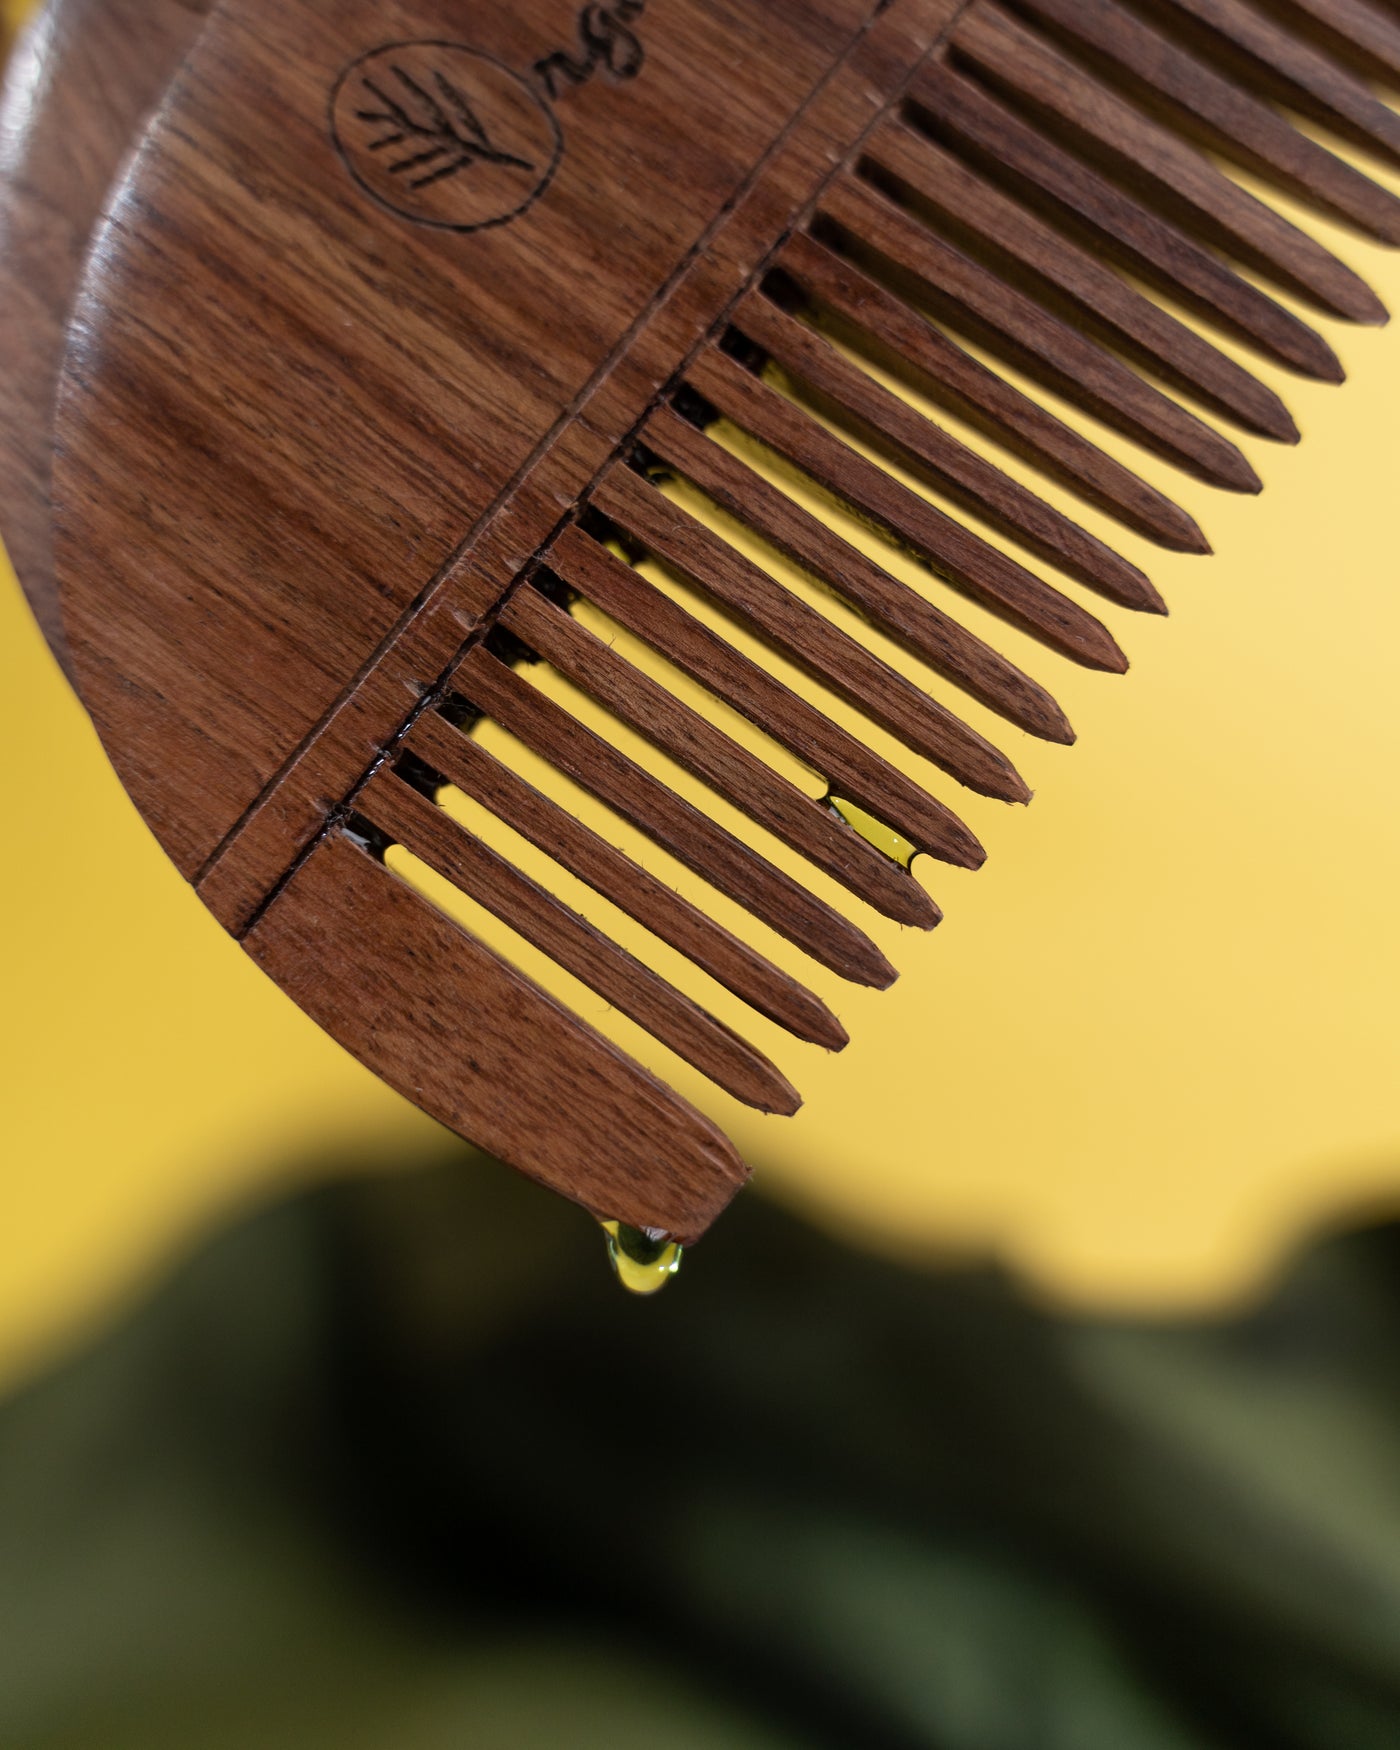 Sheesham comb with oil holes (wooden oil applicator)